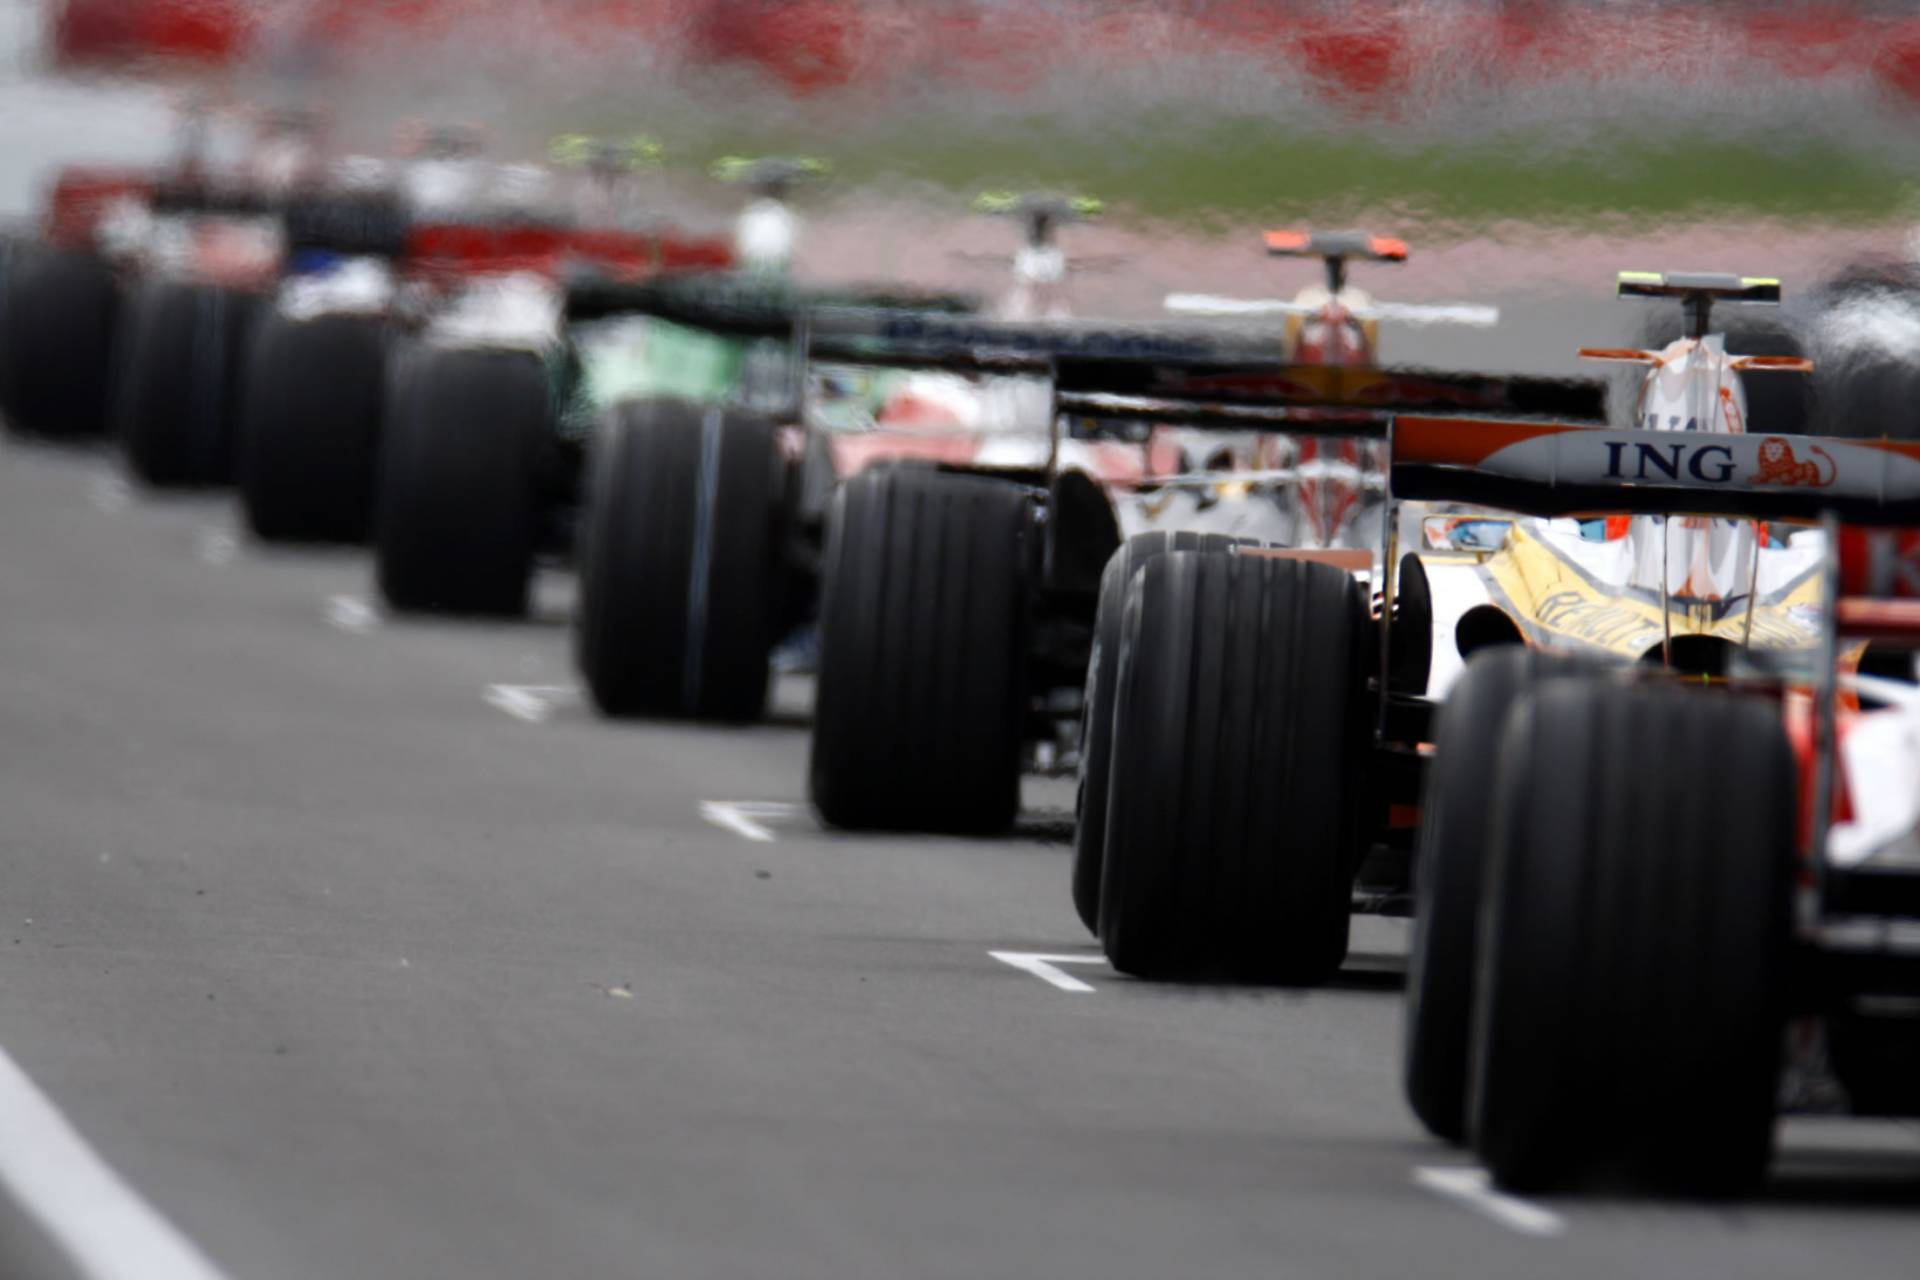 Over 50 Formula One Cars F1 Wallpapers in HD For Free Download